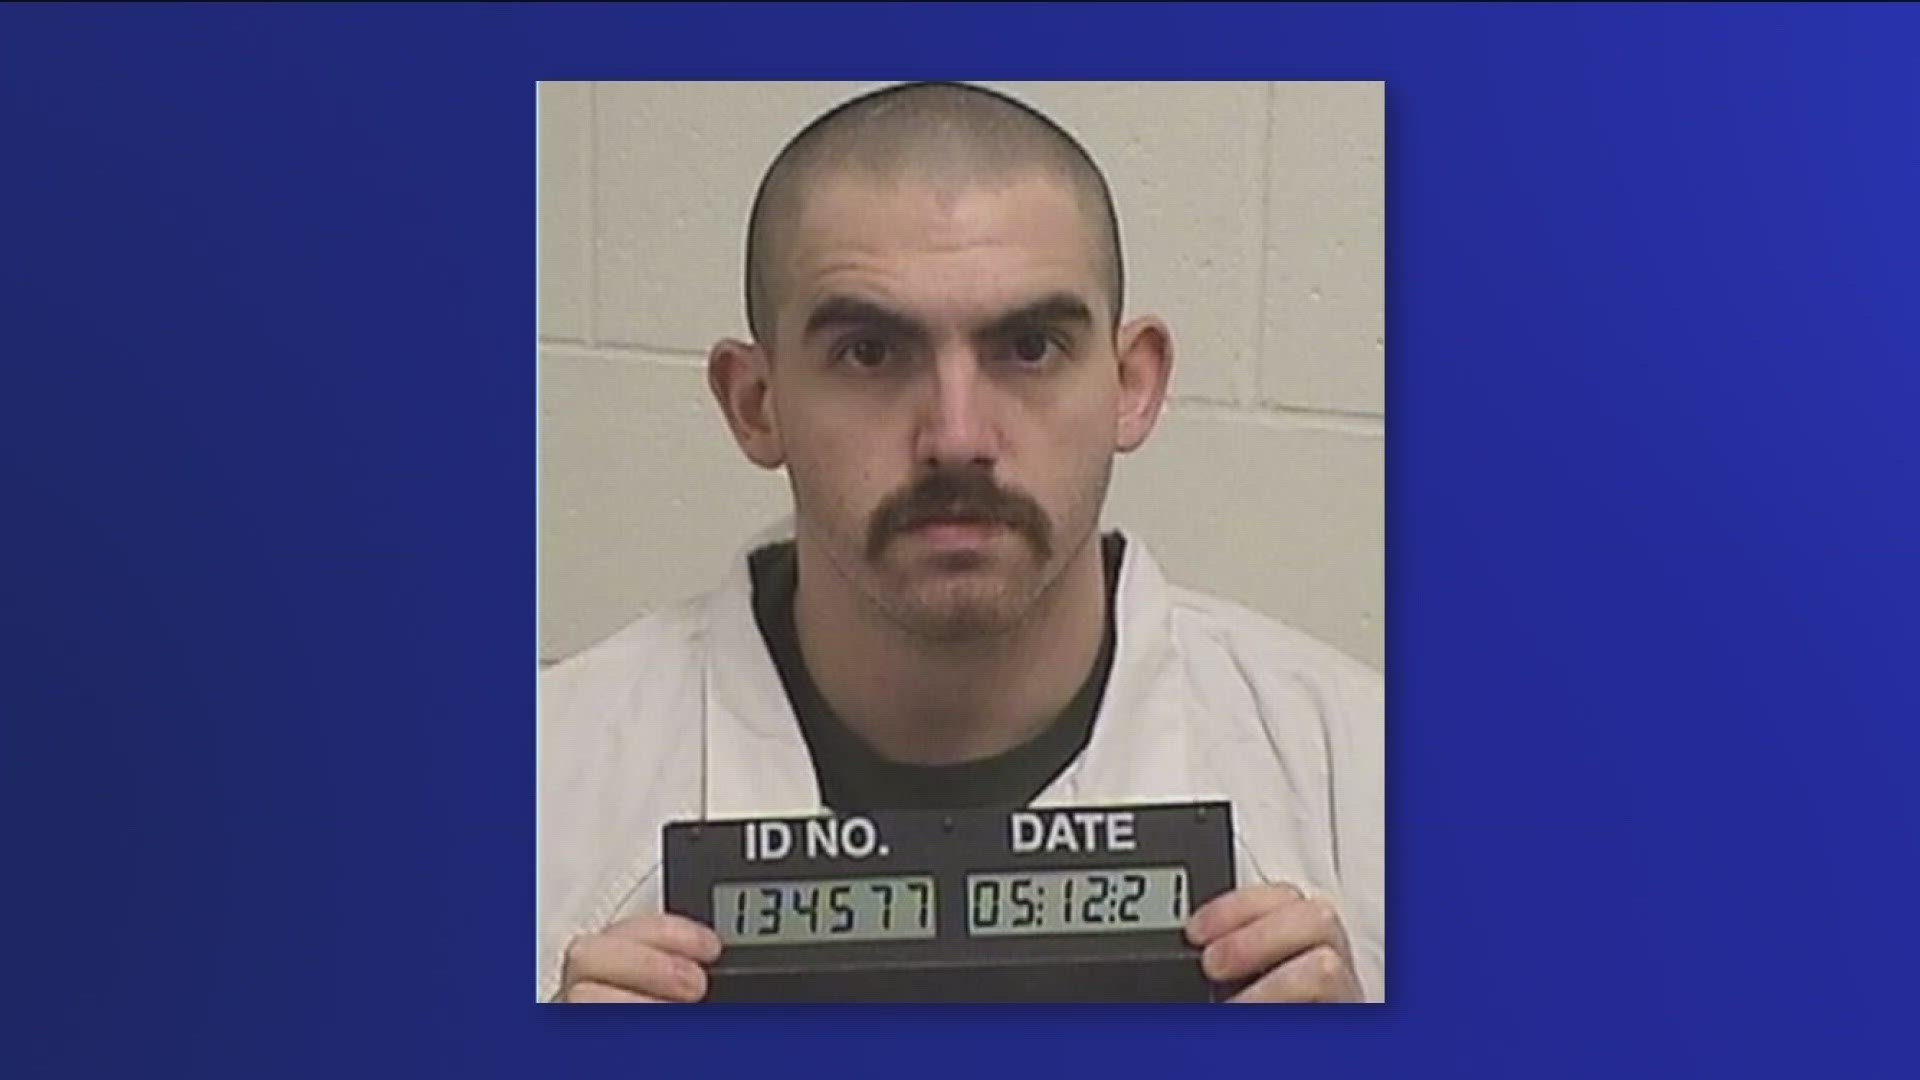 26-year-old Colton Reagan was sentenced Friday to life imprisonment, with 30 years fixed, for murdering his cellmate in December 2021.